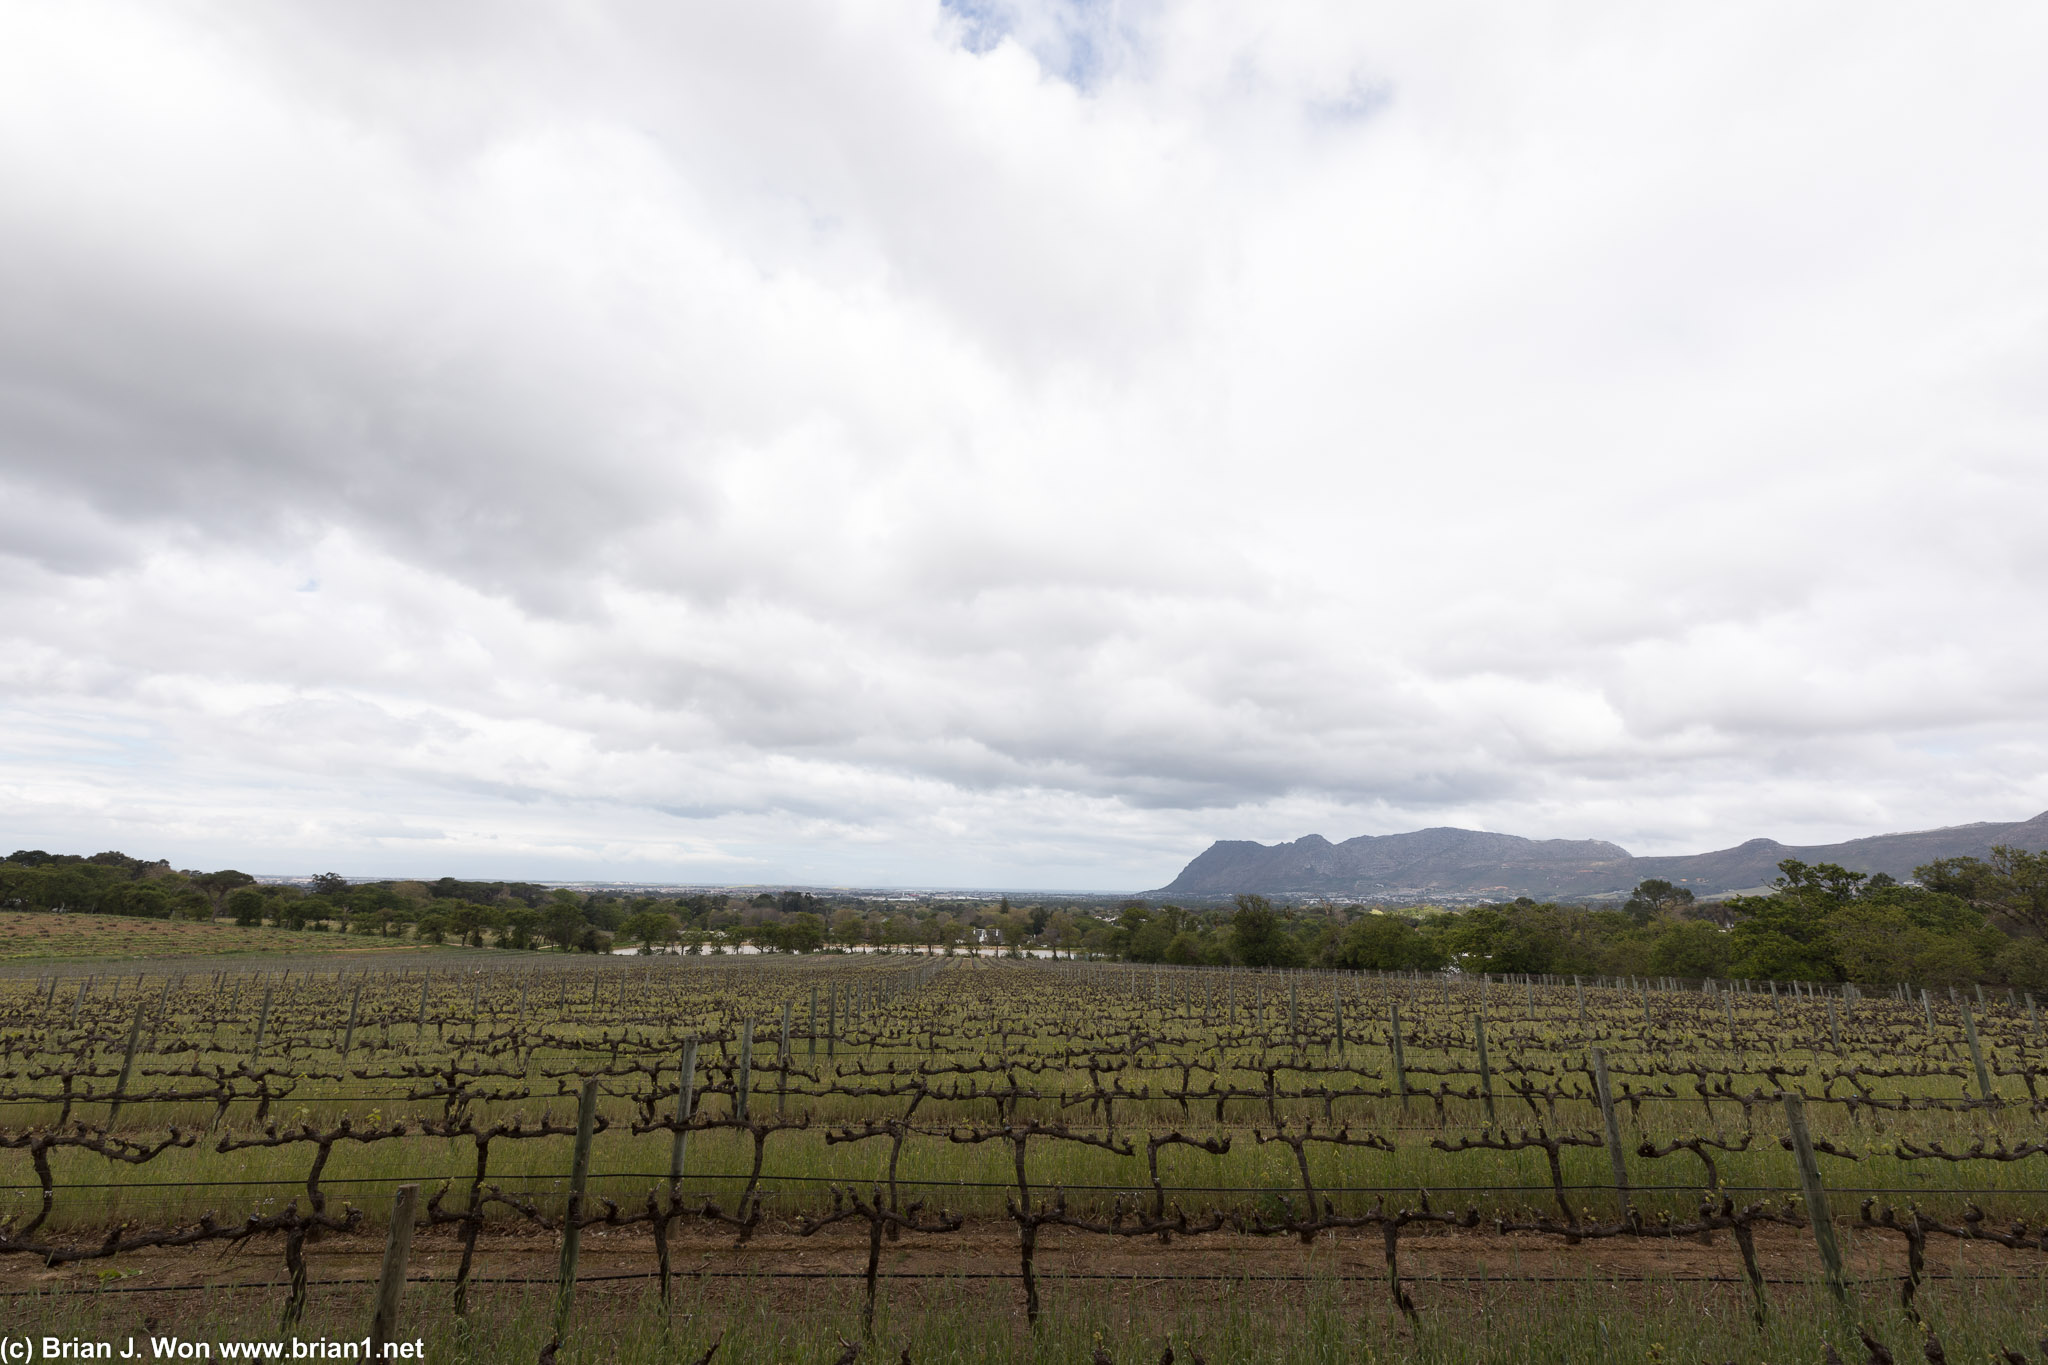 Cloudy skies and spring mean the vines are just starting to grow again.